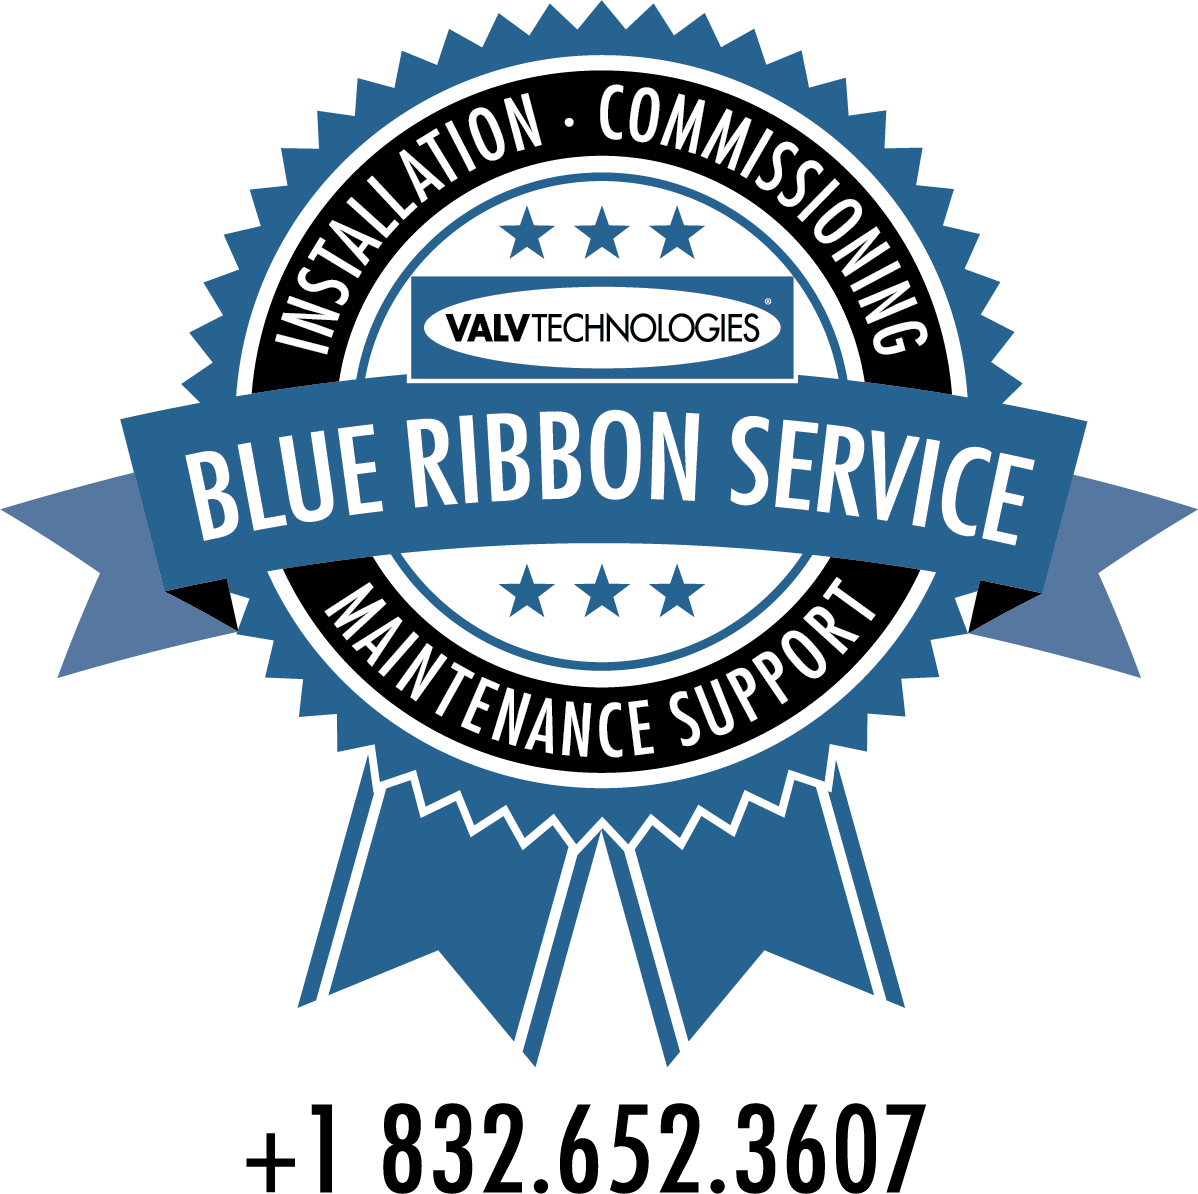 Blue Ribbon Service onsite support between shipment and operation